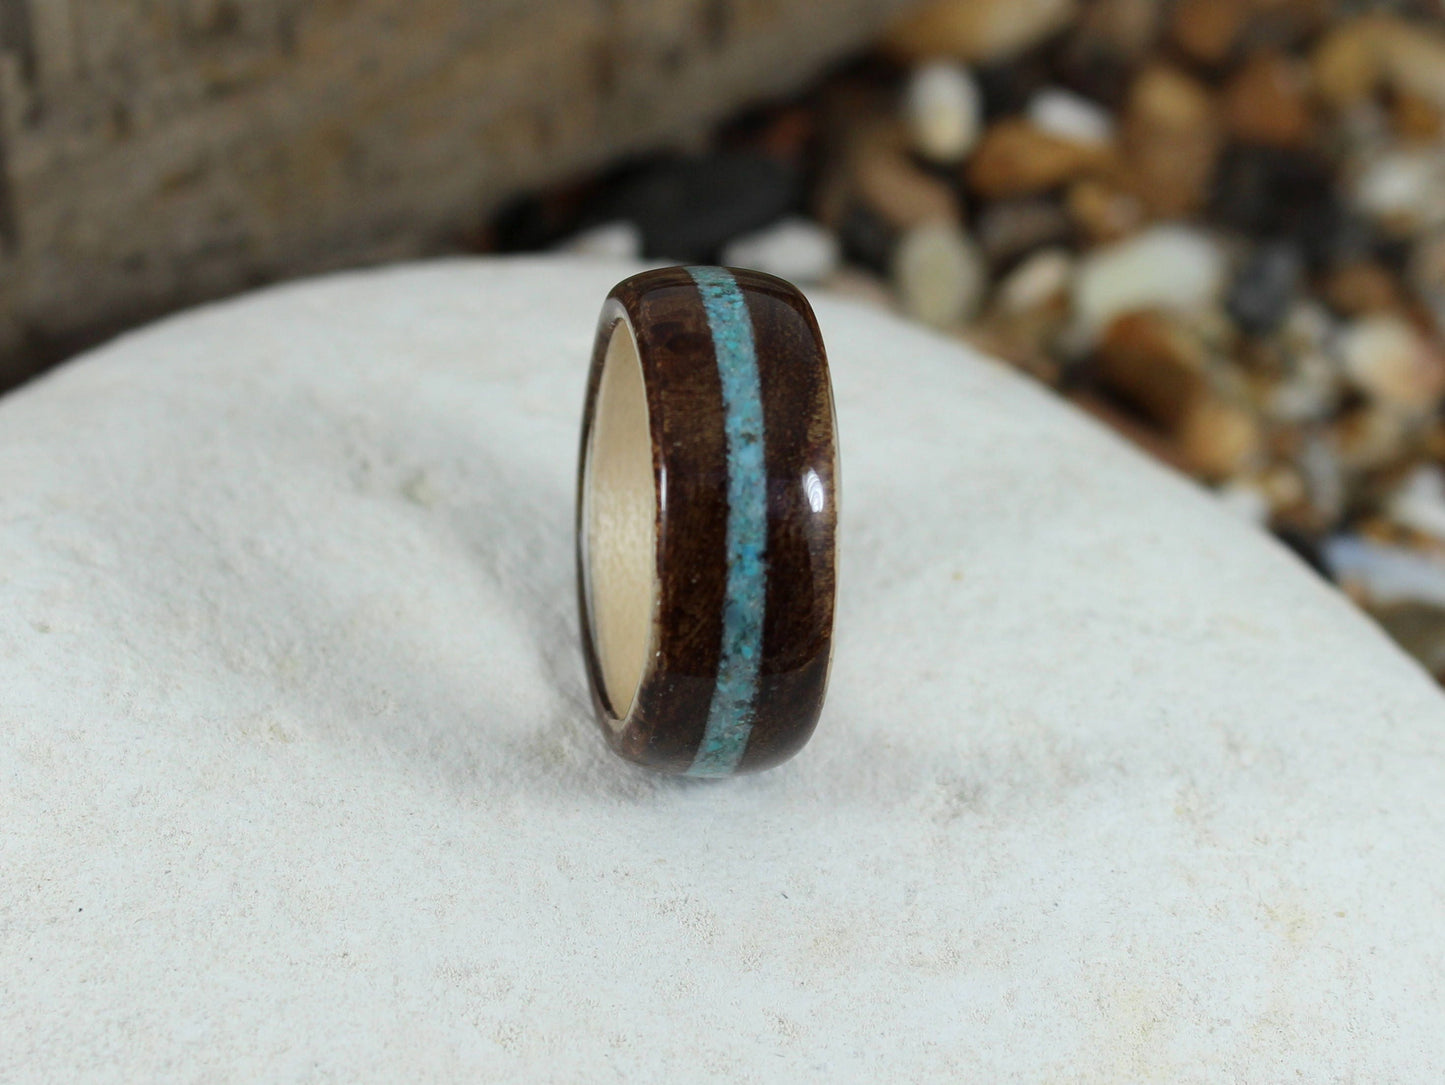 Walnut Burl & Maple with Turquoise Bent Wood Ring